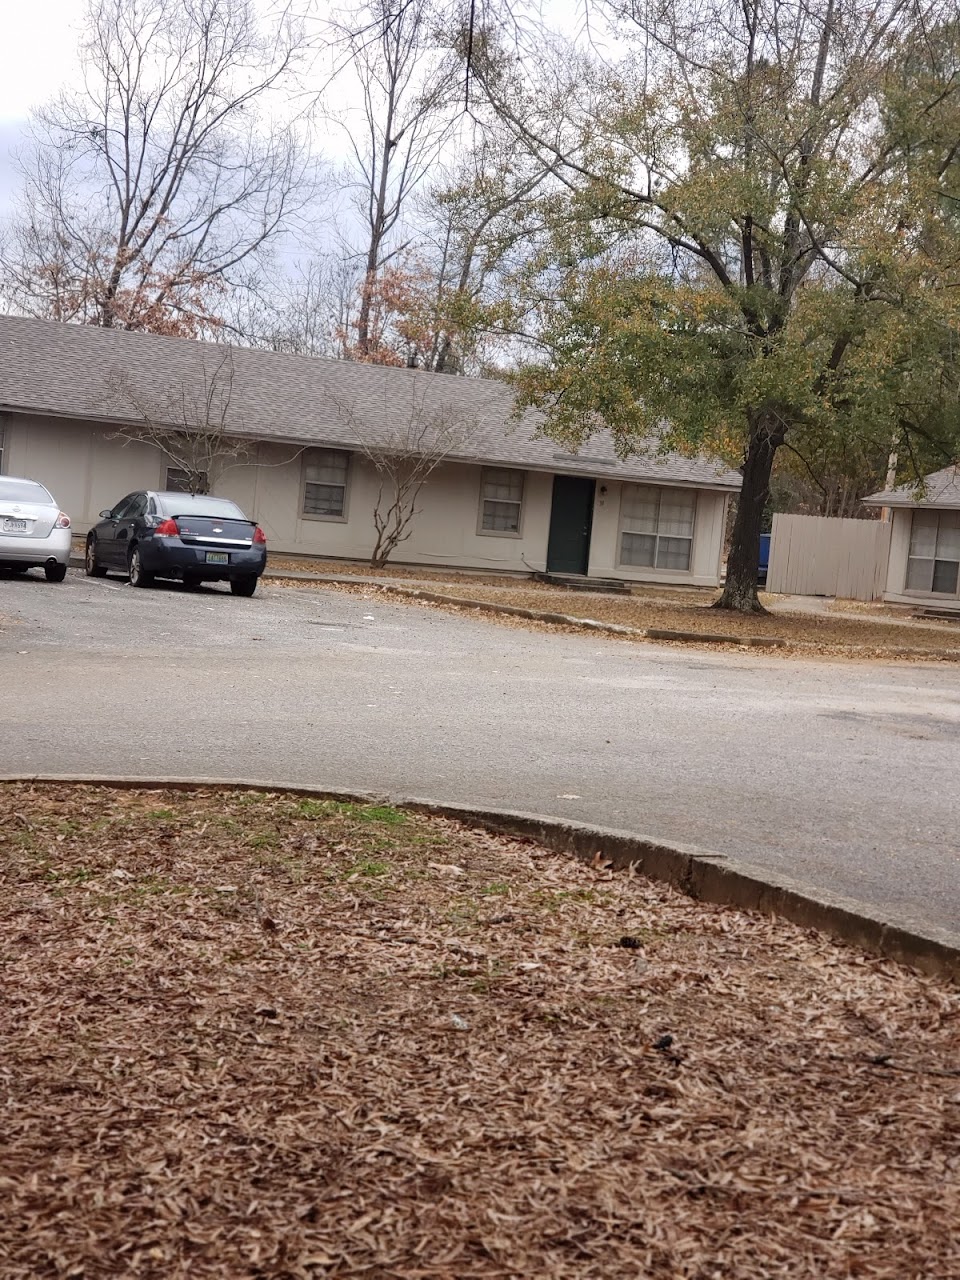 Photo of PEPPER TREE APTS at INTERSECTION OF DIVISION AVE & BELVIEW RD BESSEMER, AL 